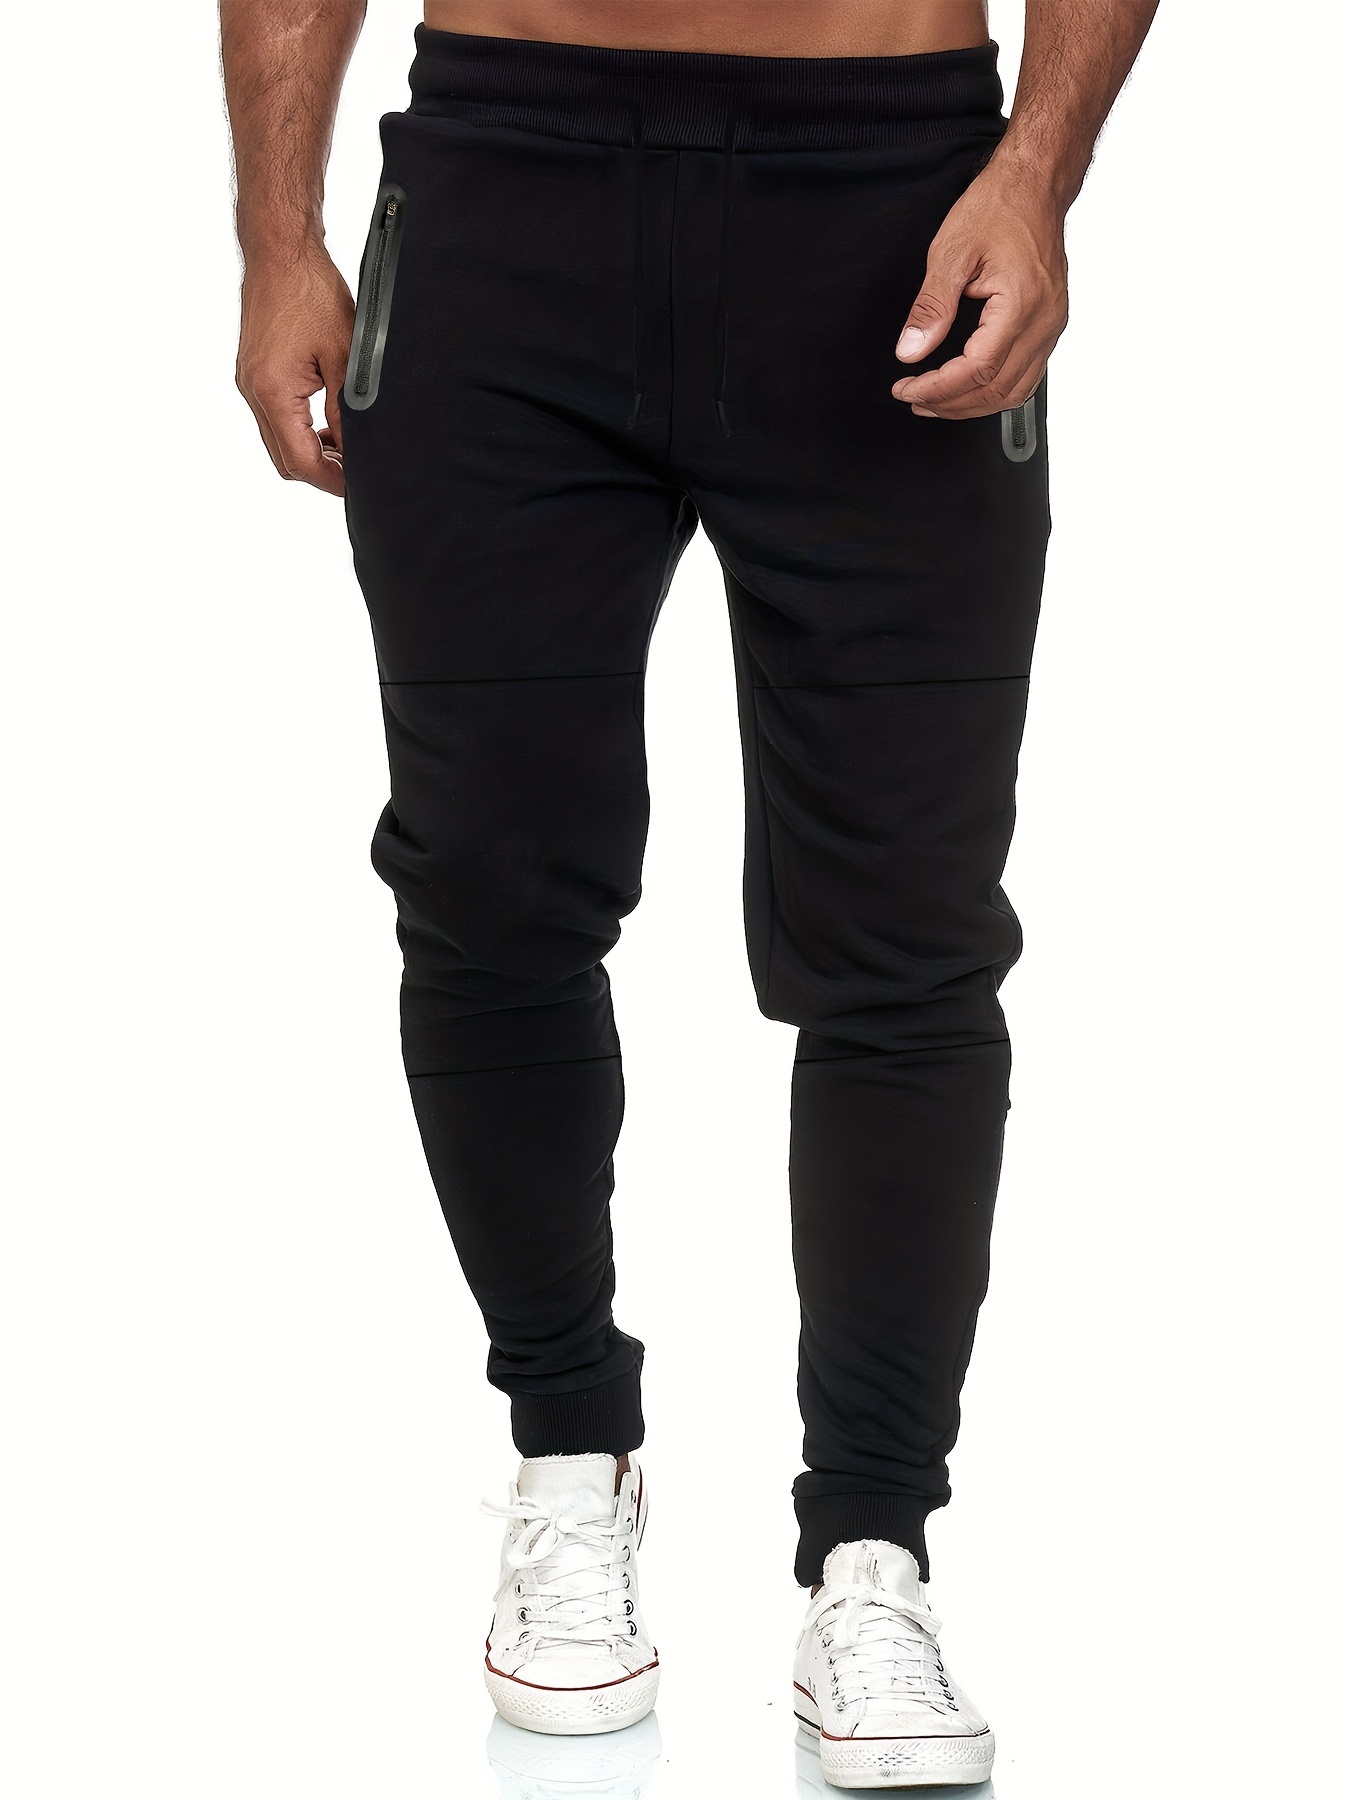 JOGGERS SWEATPANTS MEN'S CASUAL SLIM-FIT FLEECE PANTS WITH ZIPPERS ON  POCKETS